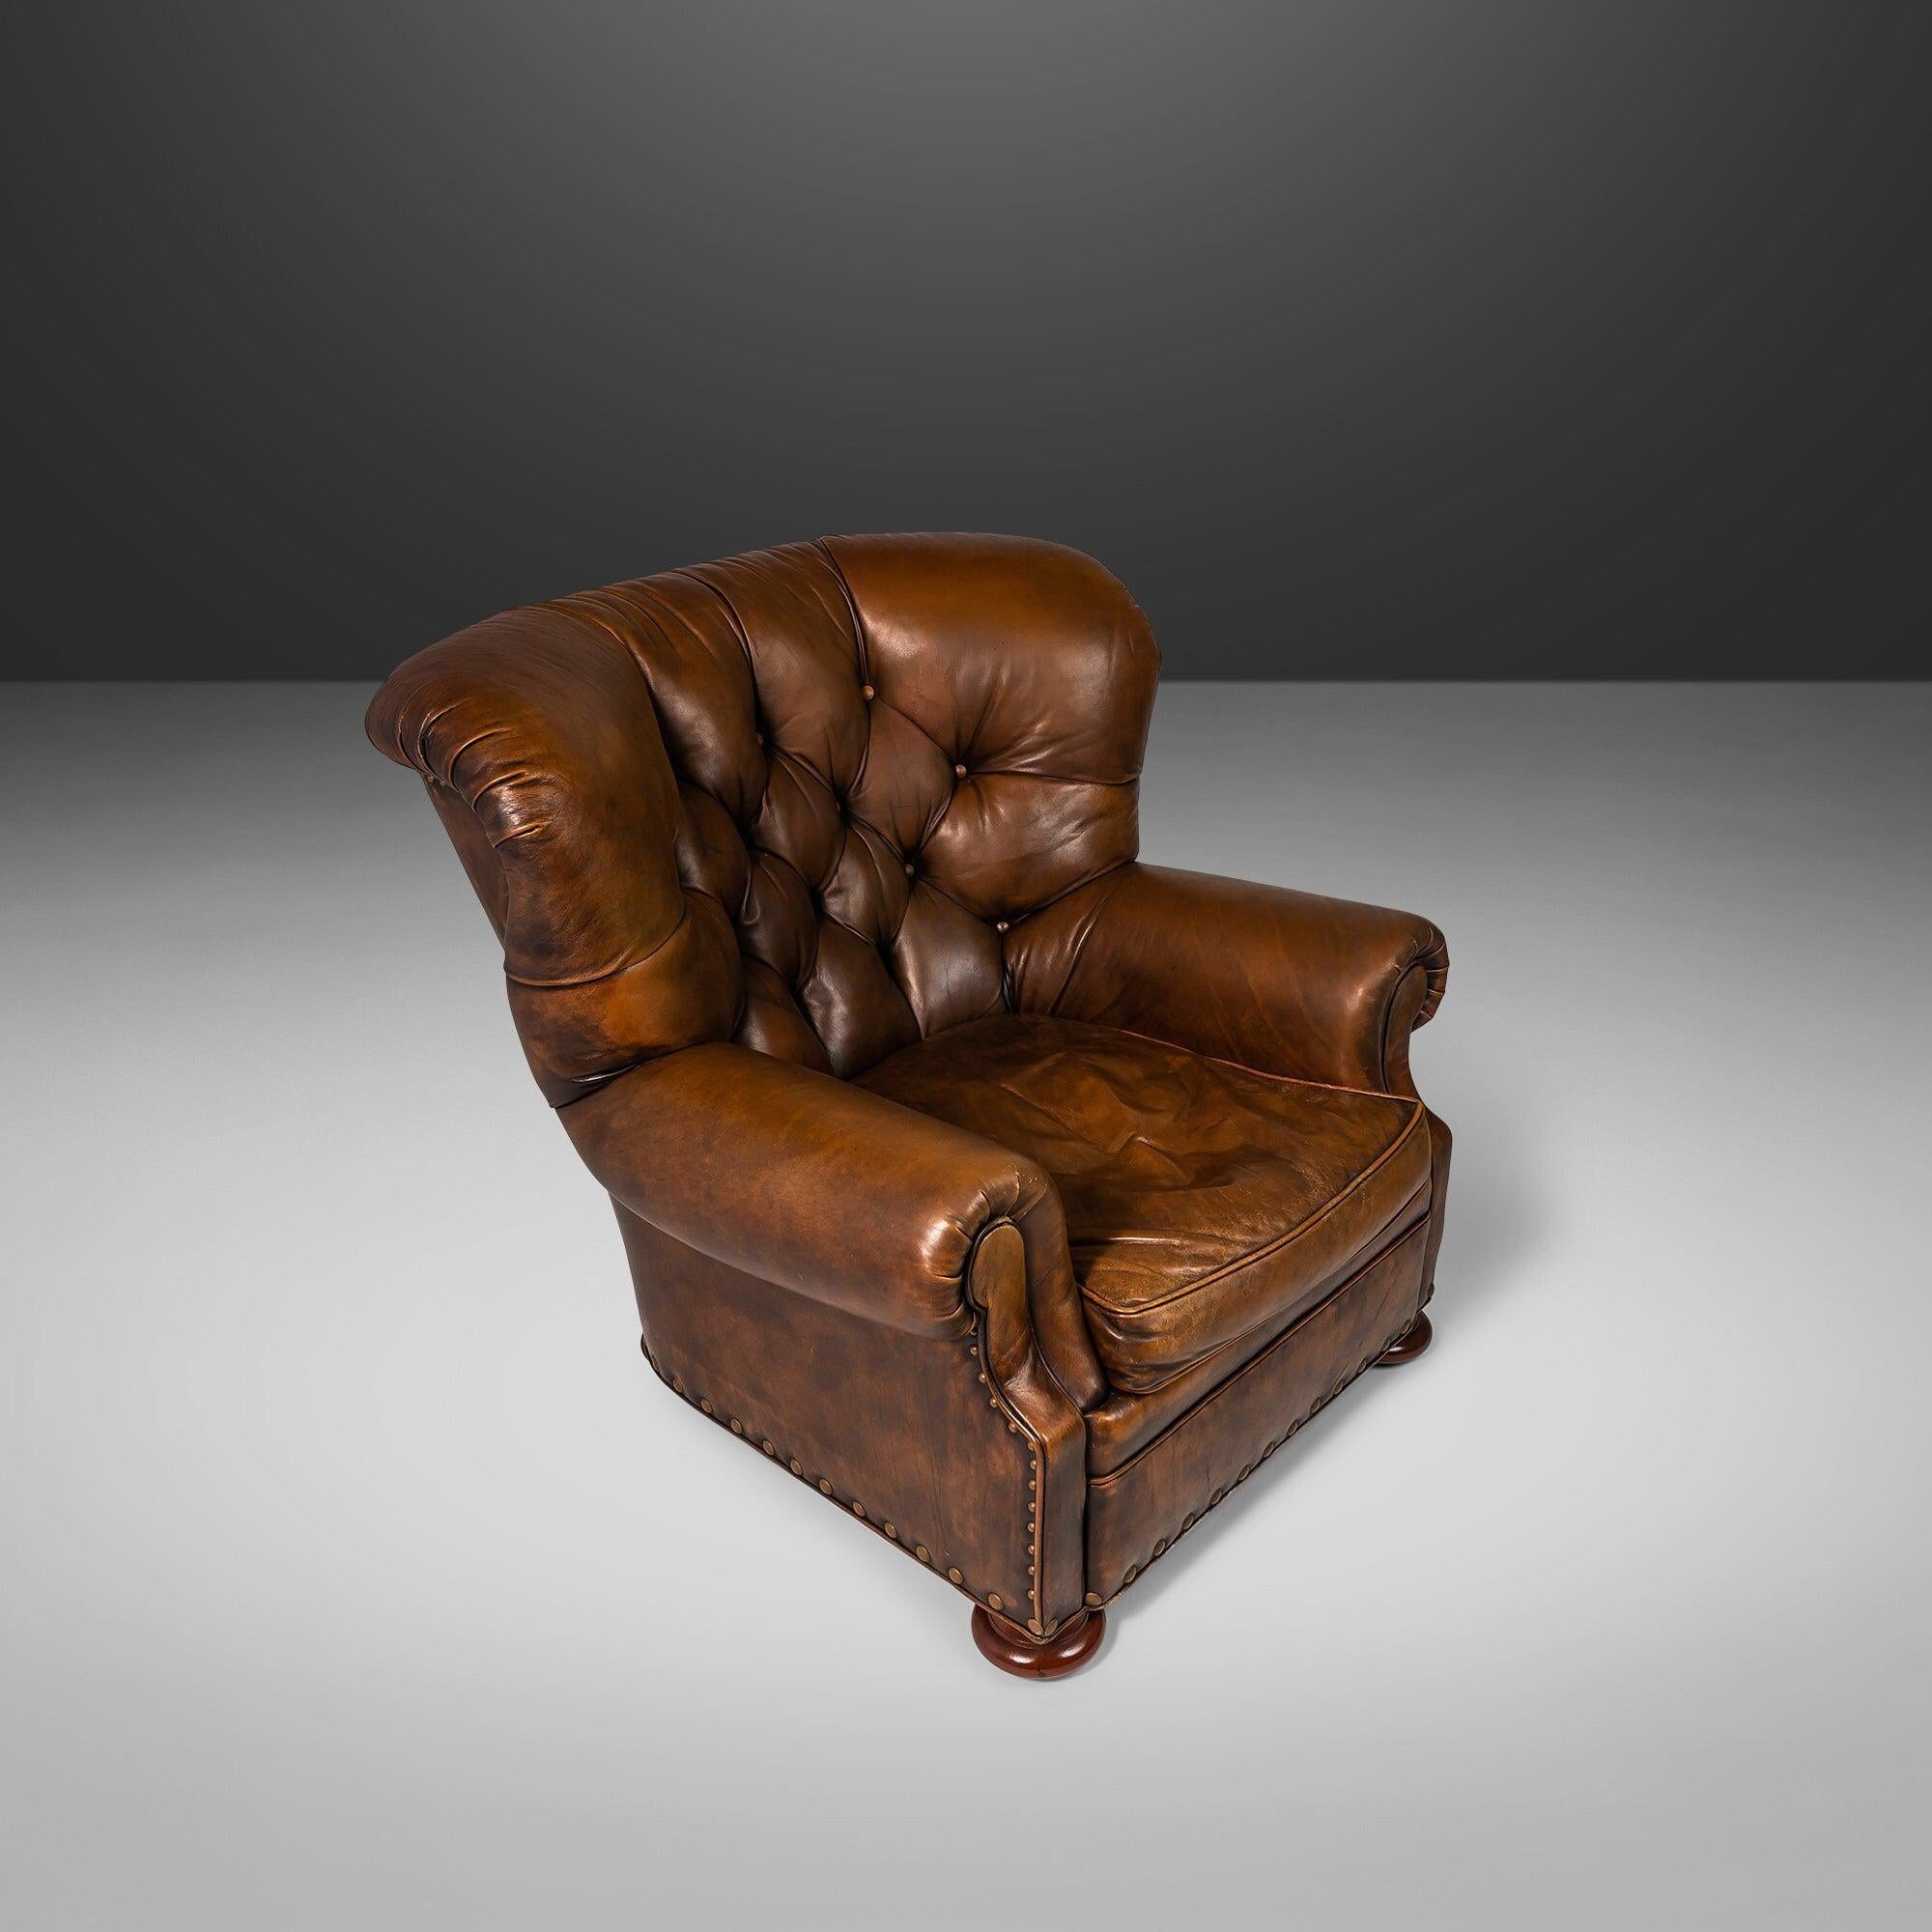 American Wingback Writer's Chair & Ottoman Attributed to Ralph Lauren in Original Leather